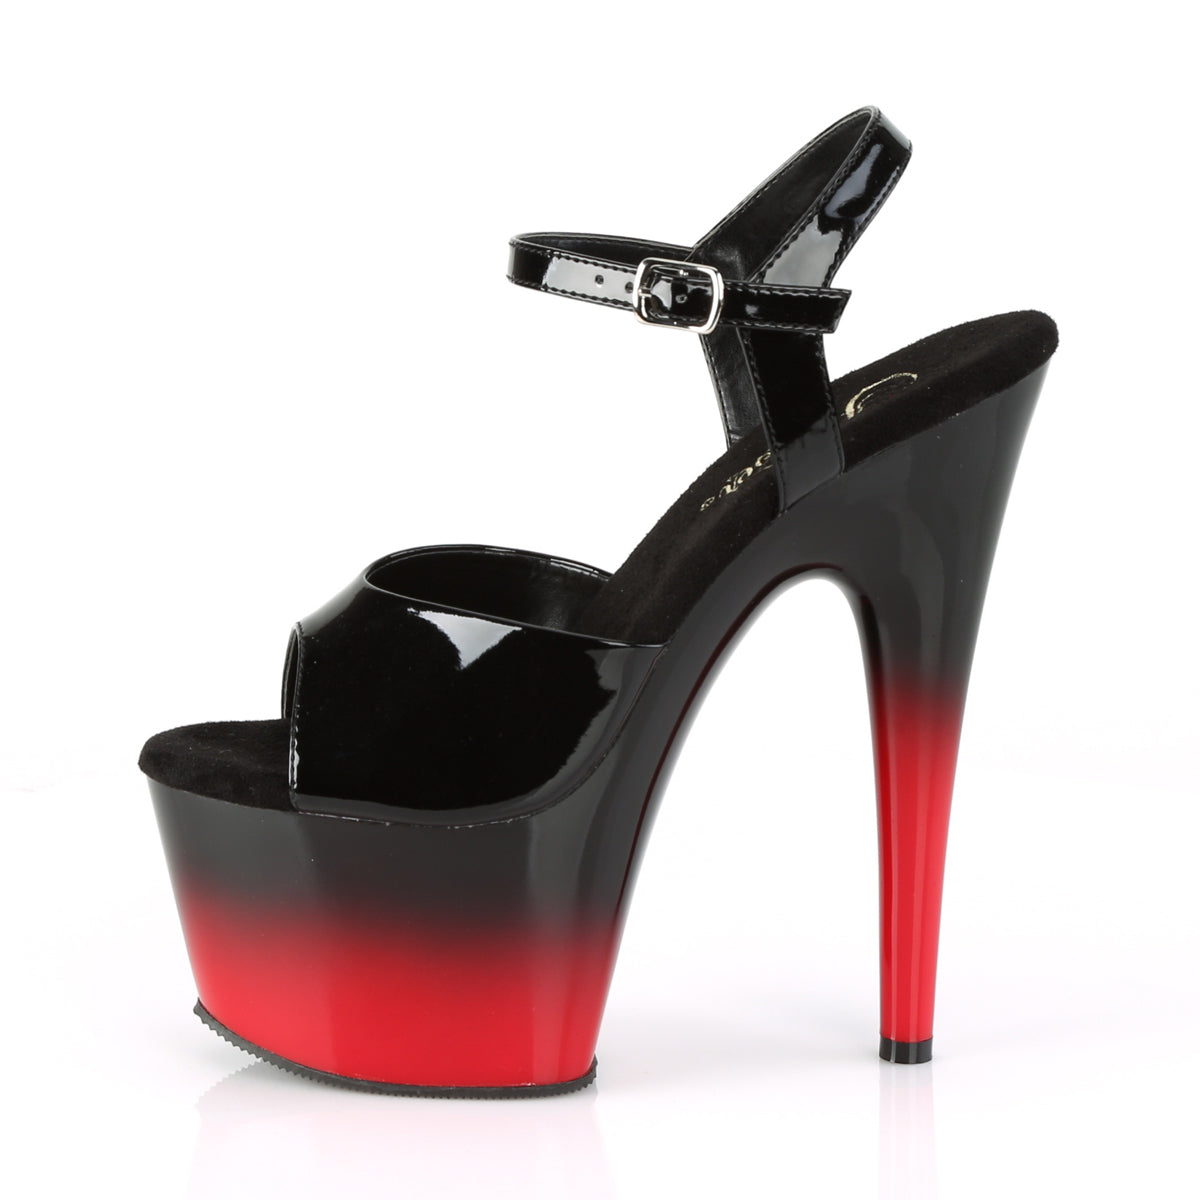 ADORE-709BR-H / B / BR 7 "PLEASER FAST DELIVERY 24-48h 